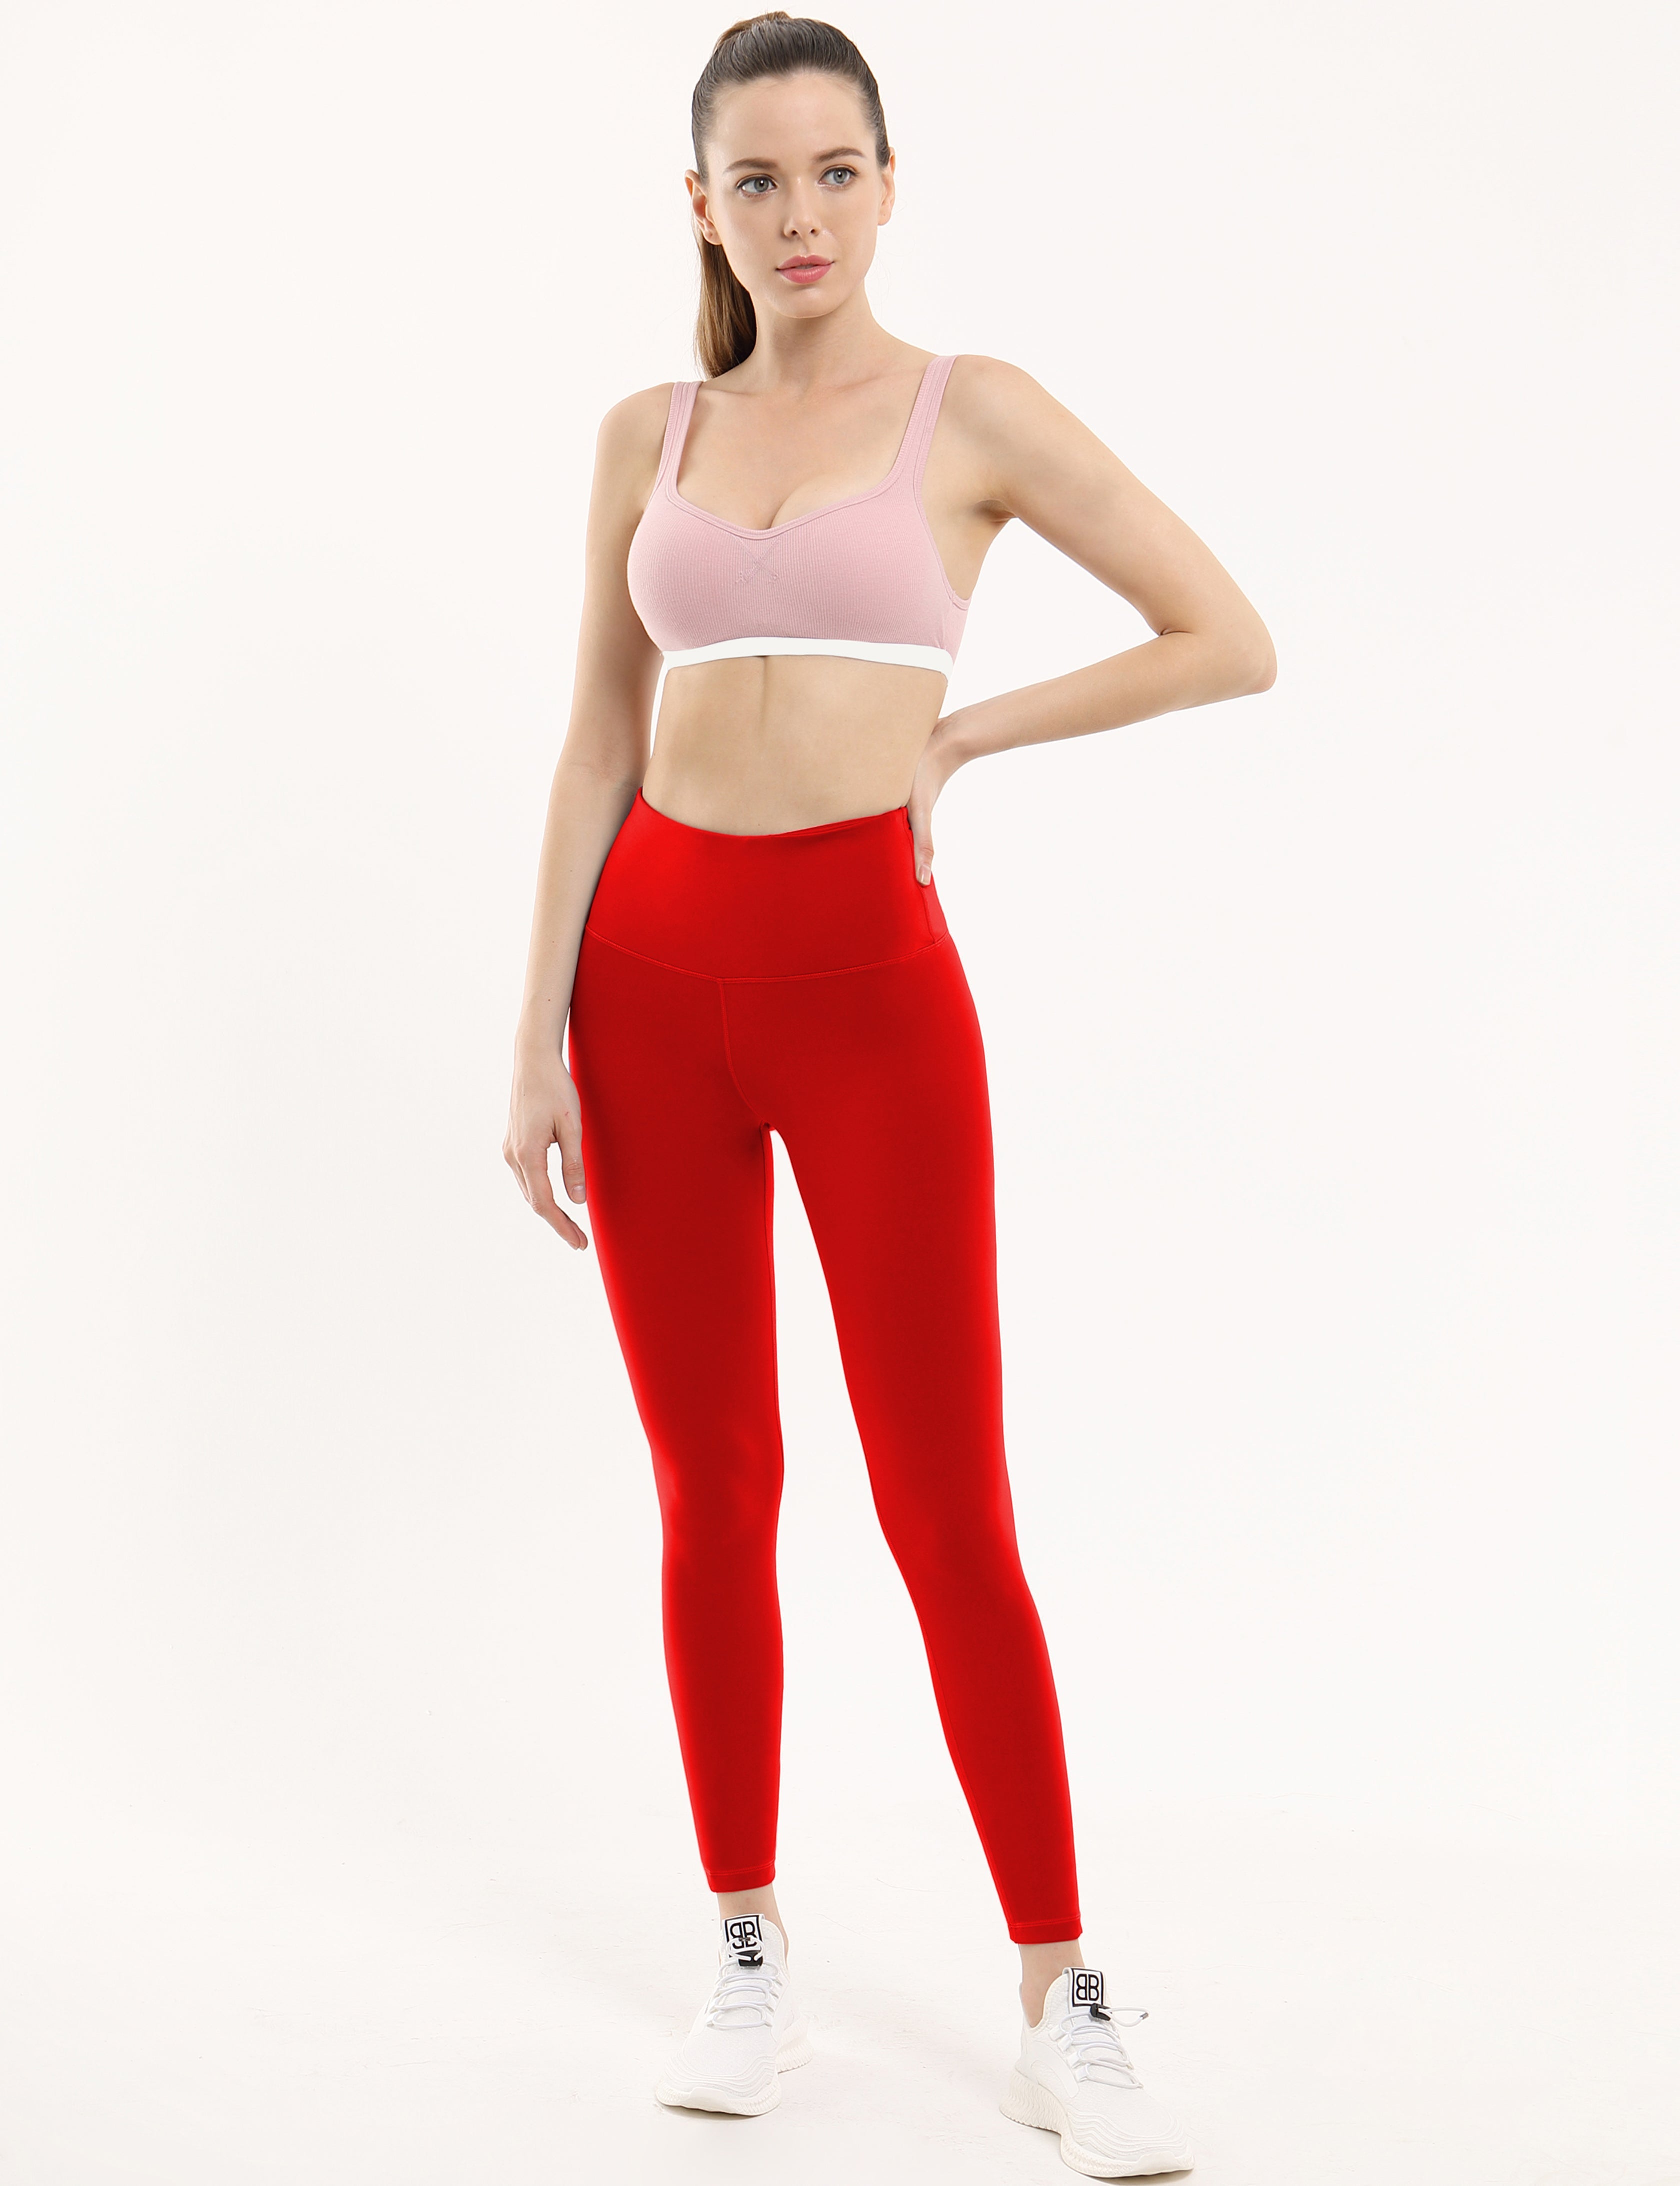 High Waist Gym Pants scarlet 75%Nylon/25%Spandex Fabric doesn't attract lint easily 4-way stretch No see-through Moisture-wicking Tummy control Inner pocket Four lengths